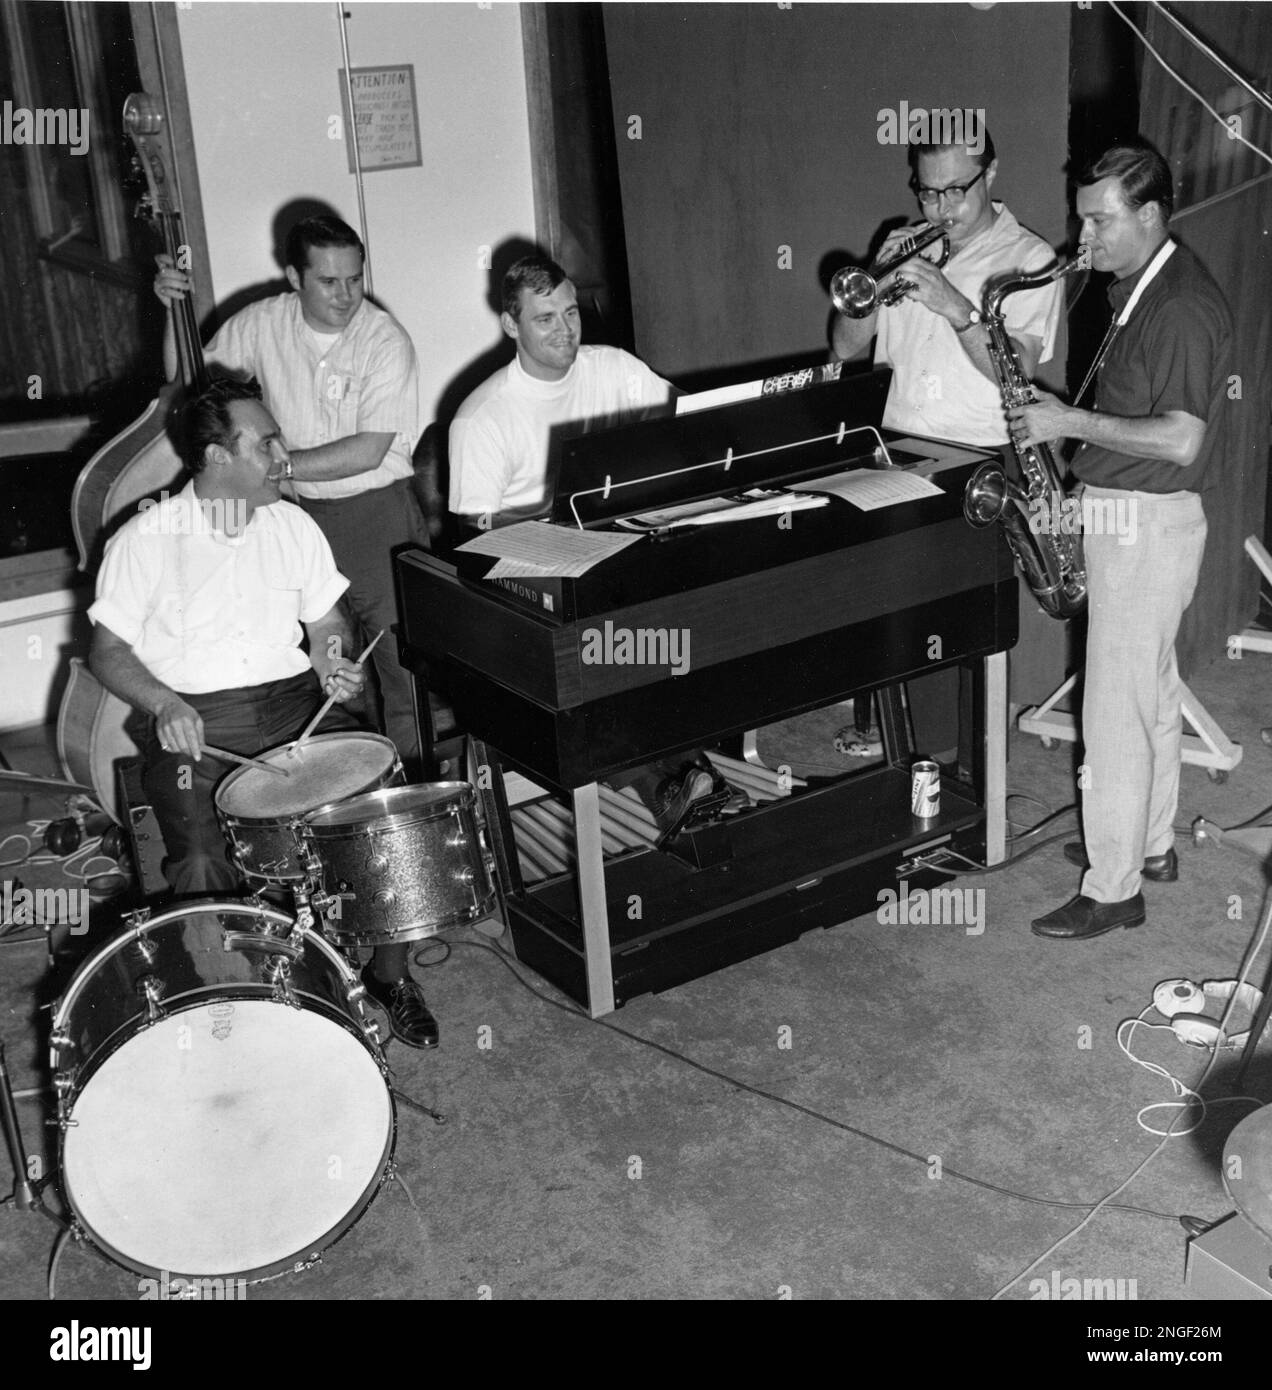 Detroit Tigers pitcher Denny McLain debuts playing the organ as a recording  artist with the Denny McLain Quintet as the group cut their first record  for Capitol Records at a Detroit studio